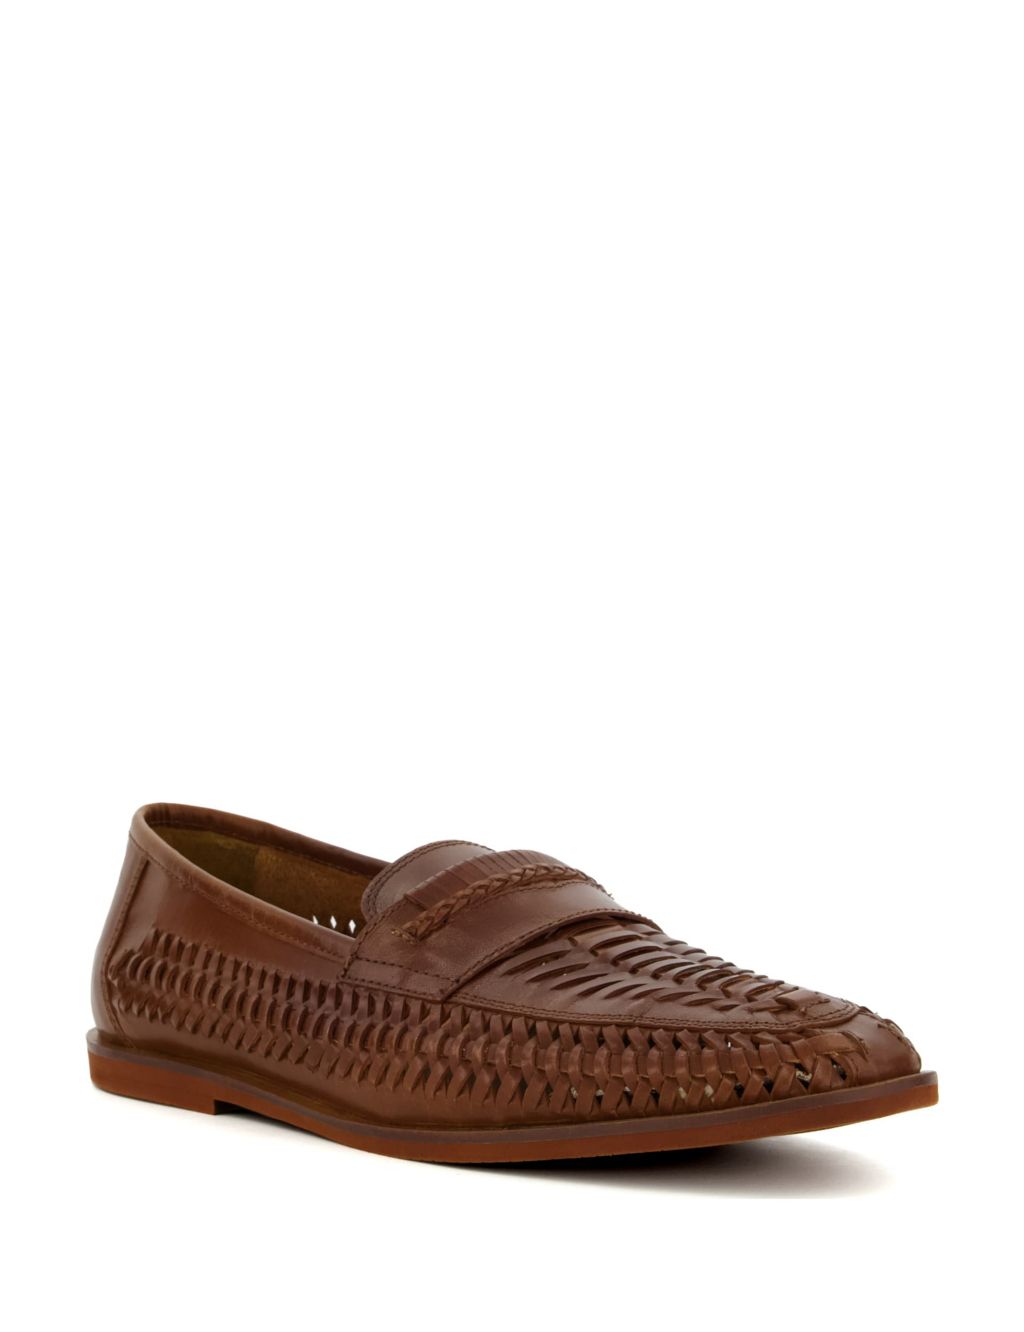 Leather Woven Flat Loafers image 2